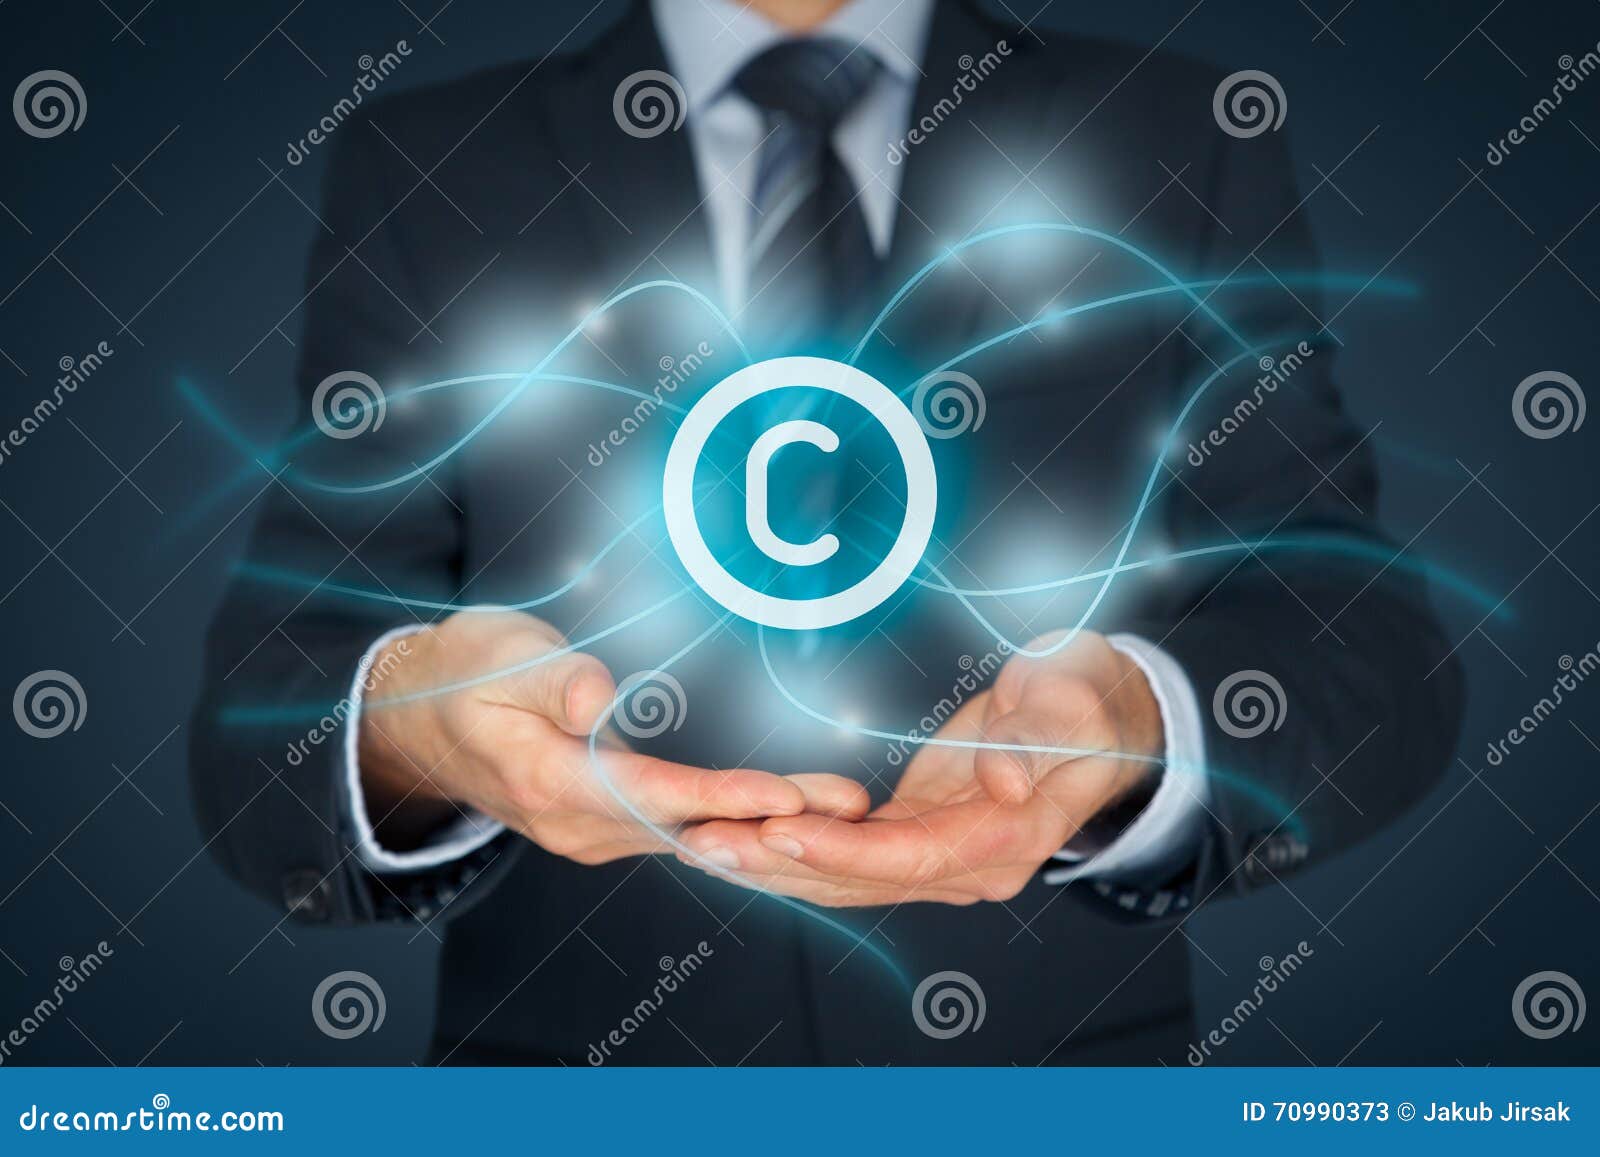 intellectual property protection and copyright